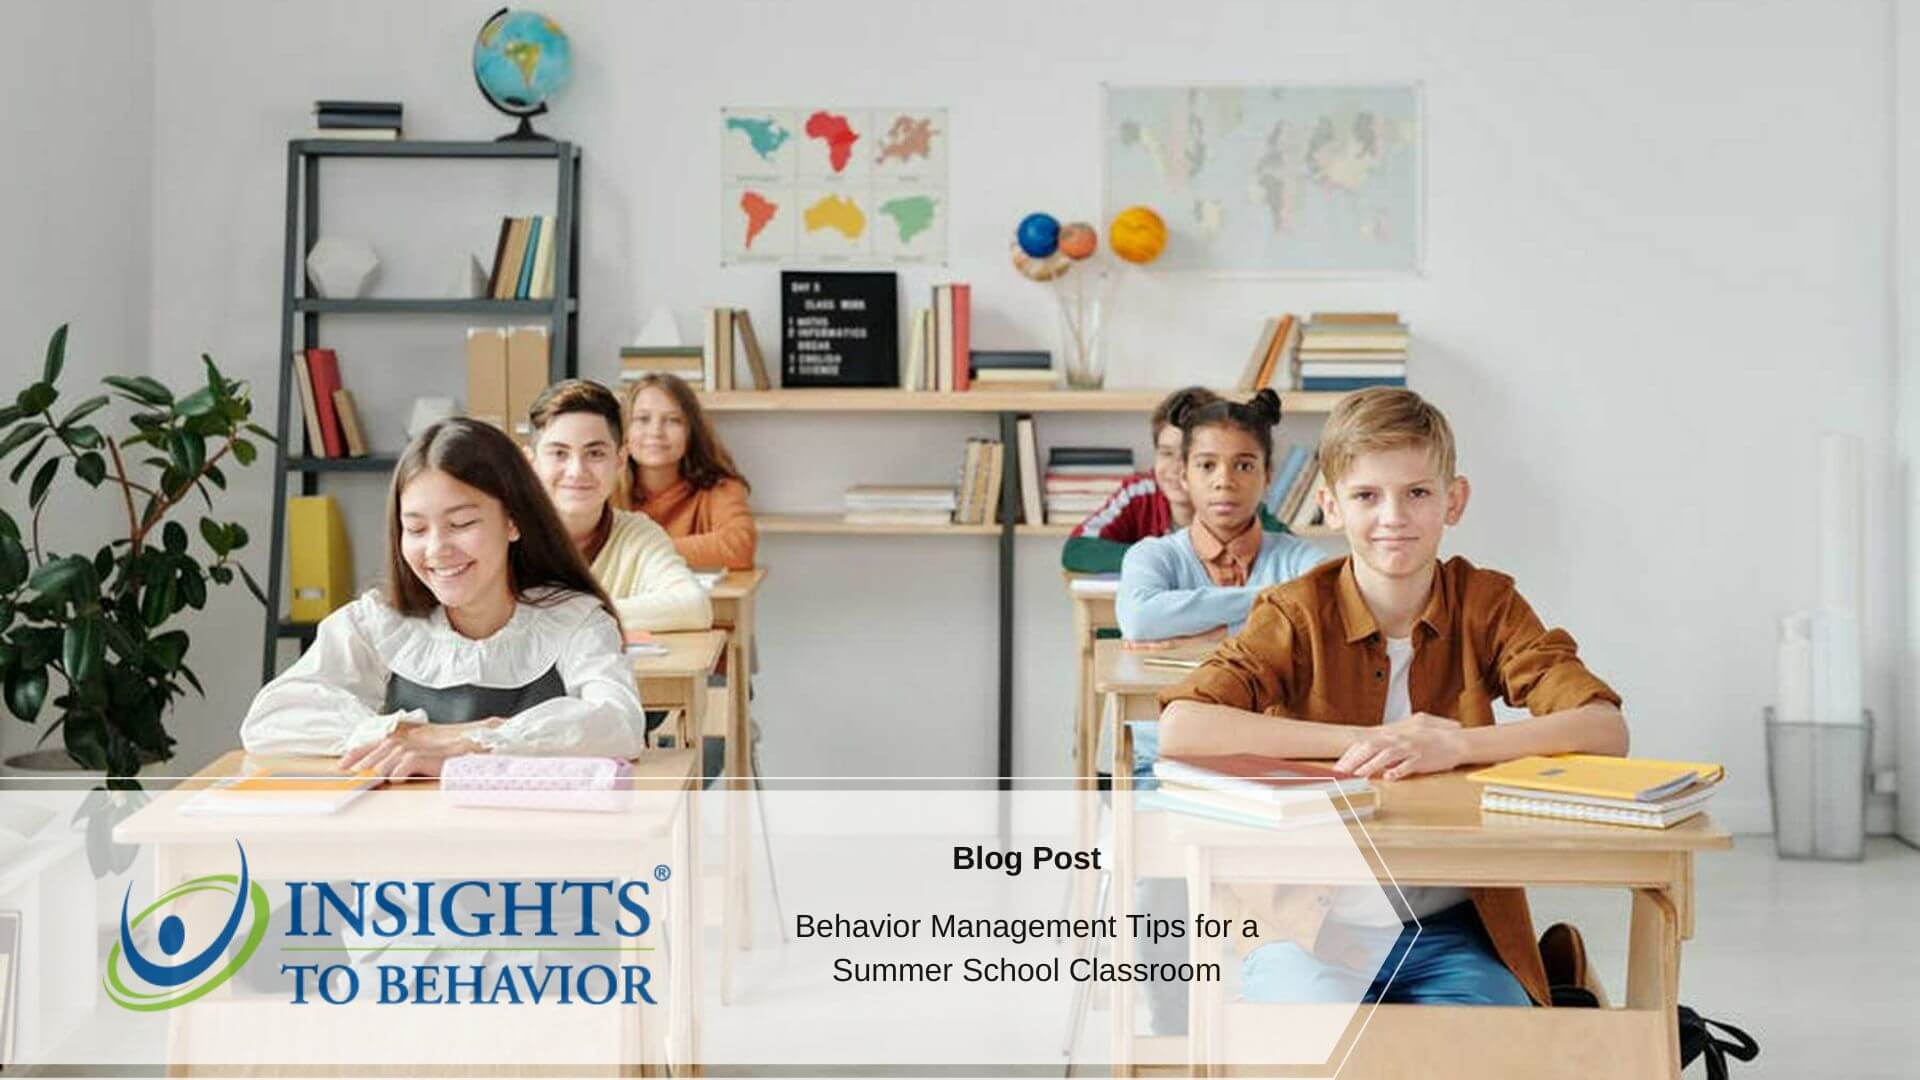 Insights to behavior blog post image template (4)